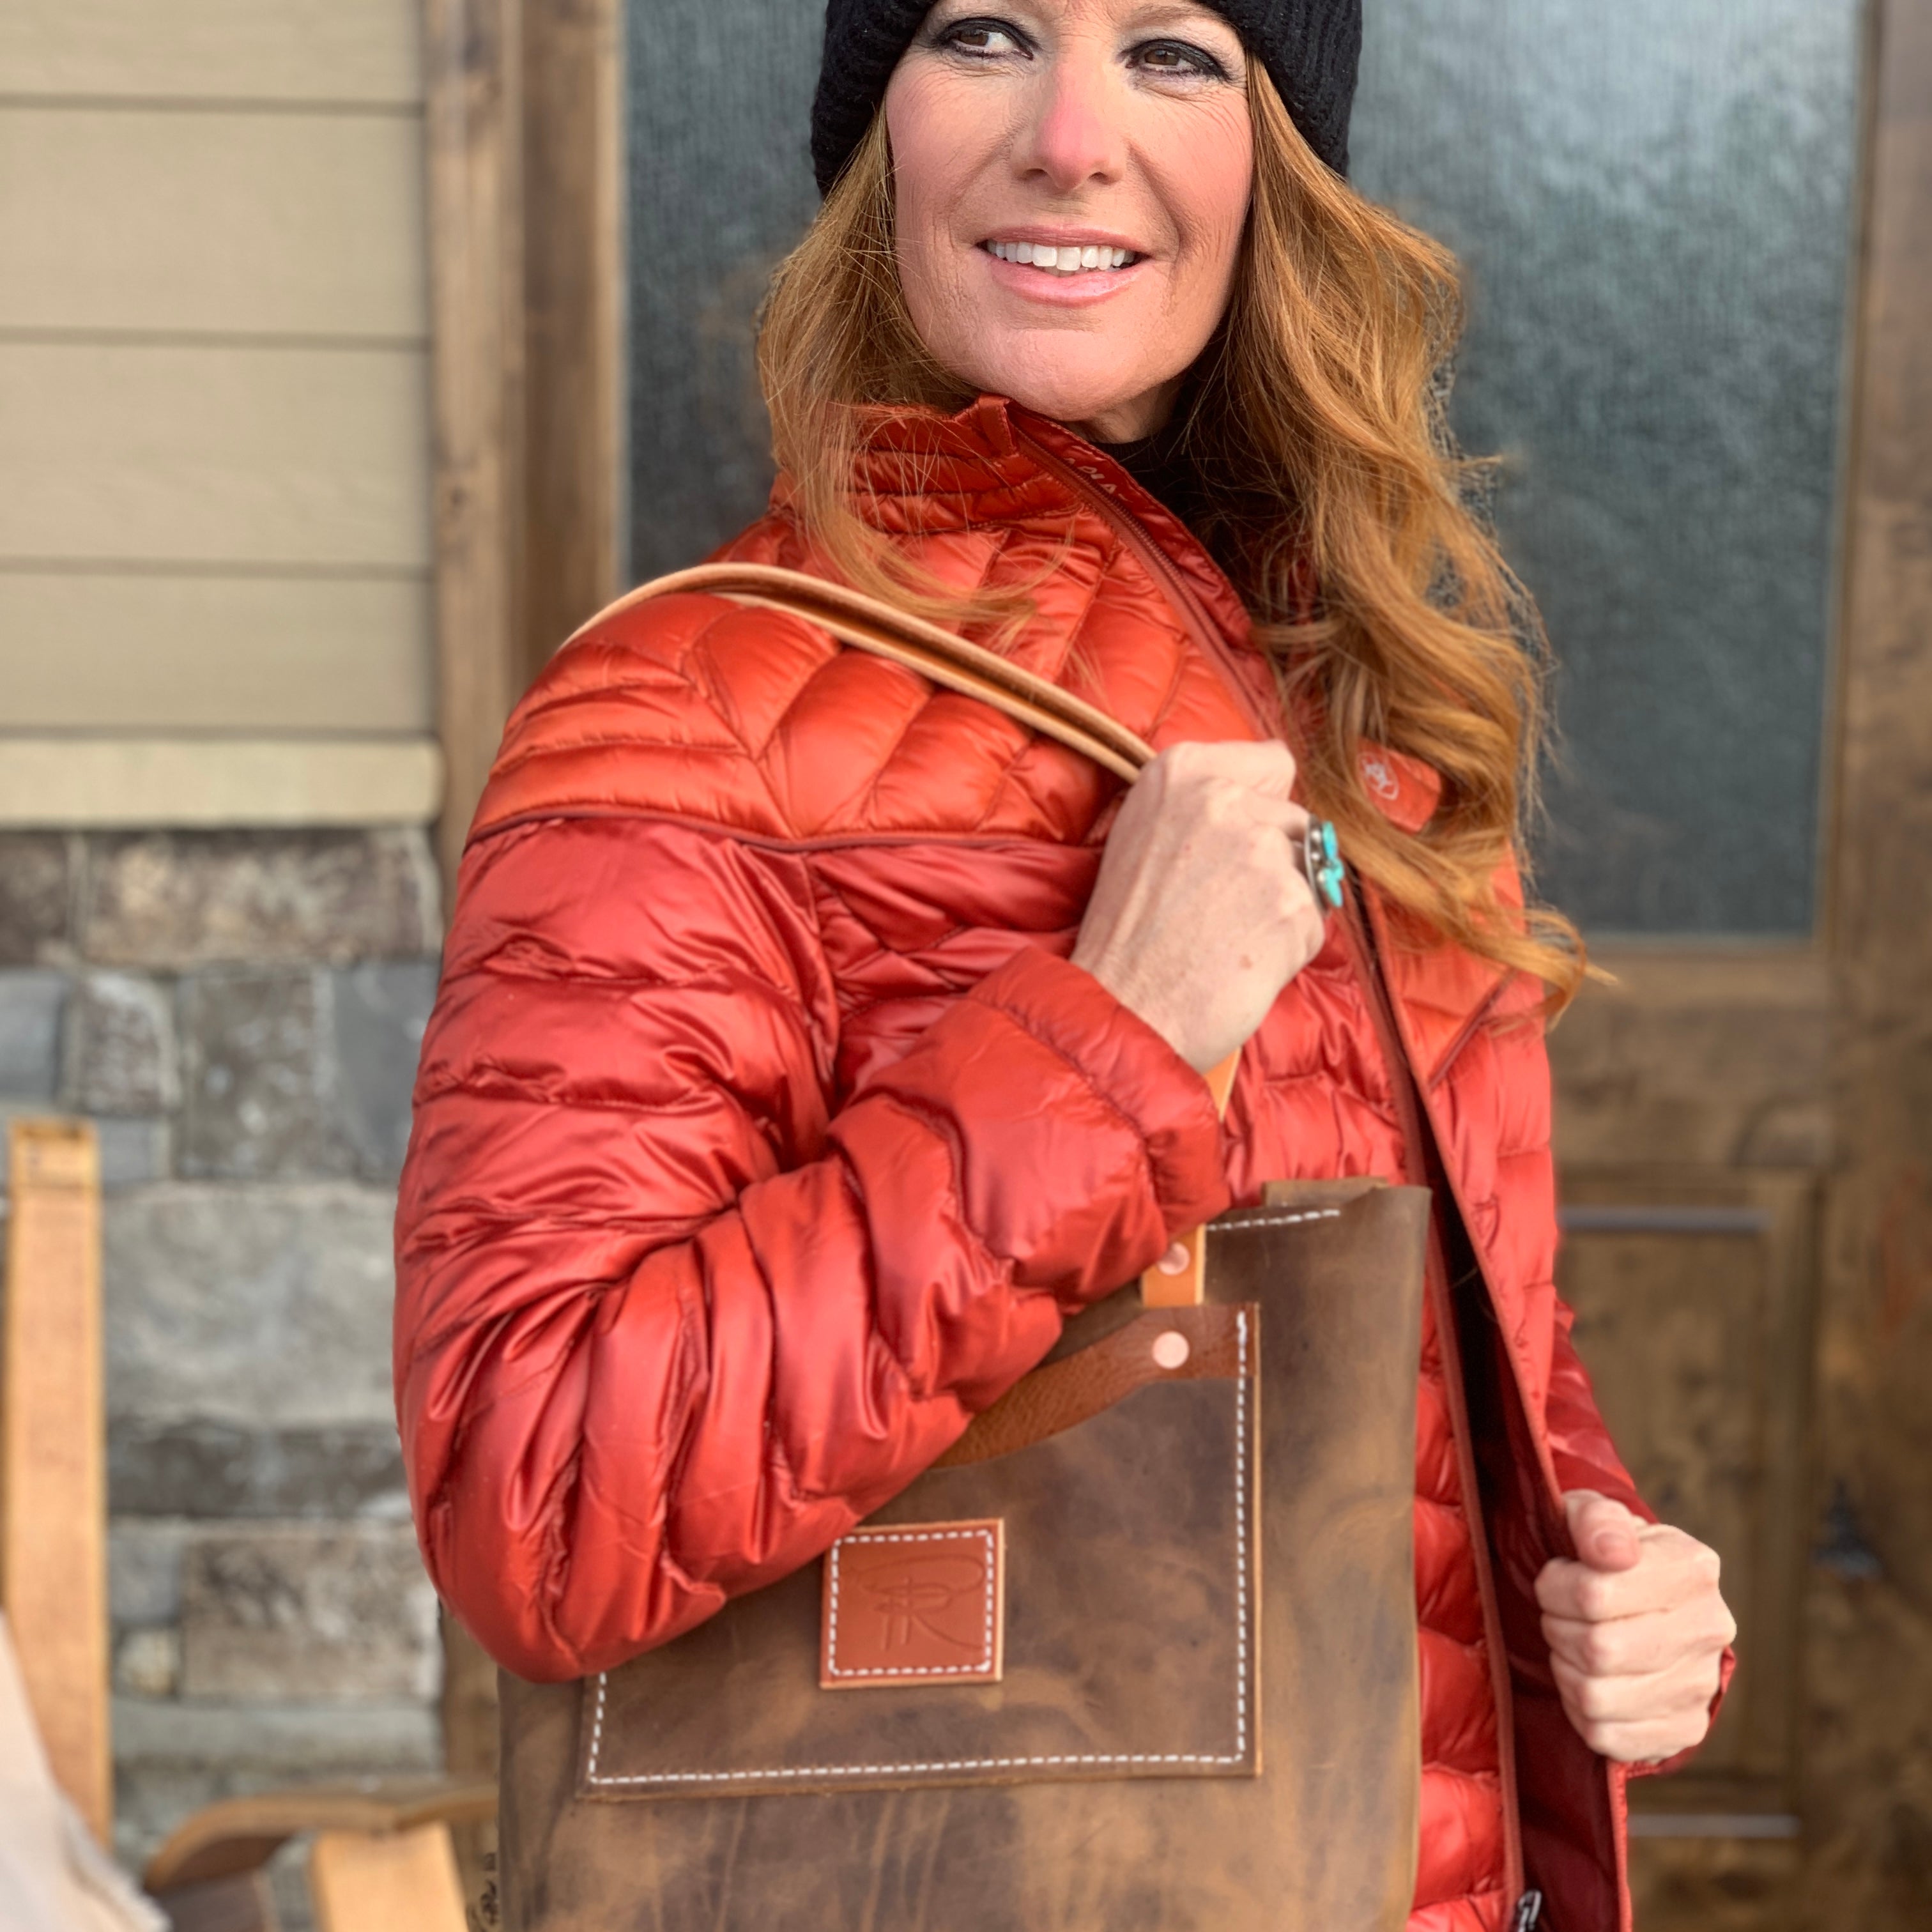 panhandle red leather goods shopping gifts boutique retail north idaho